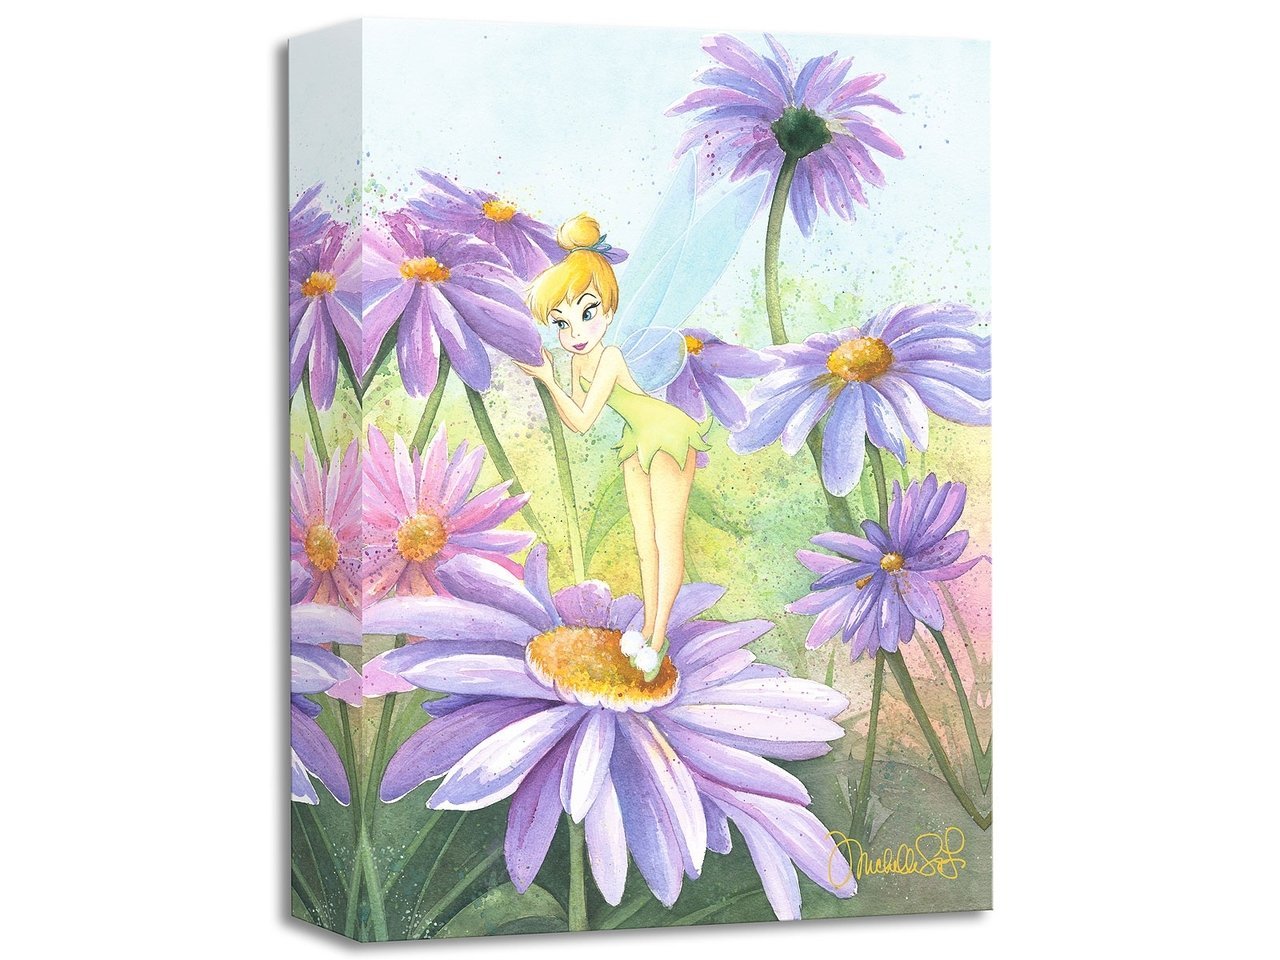 Tinker Bell is smelling the purple daisies